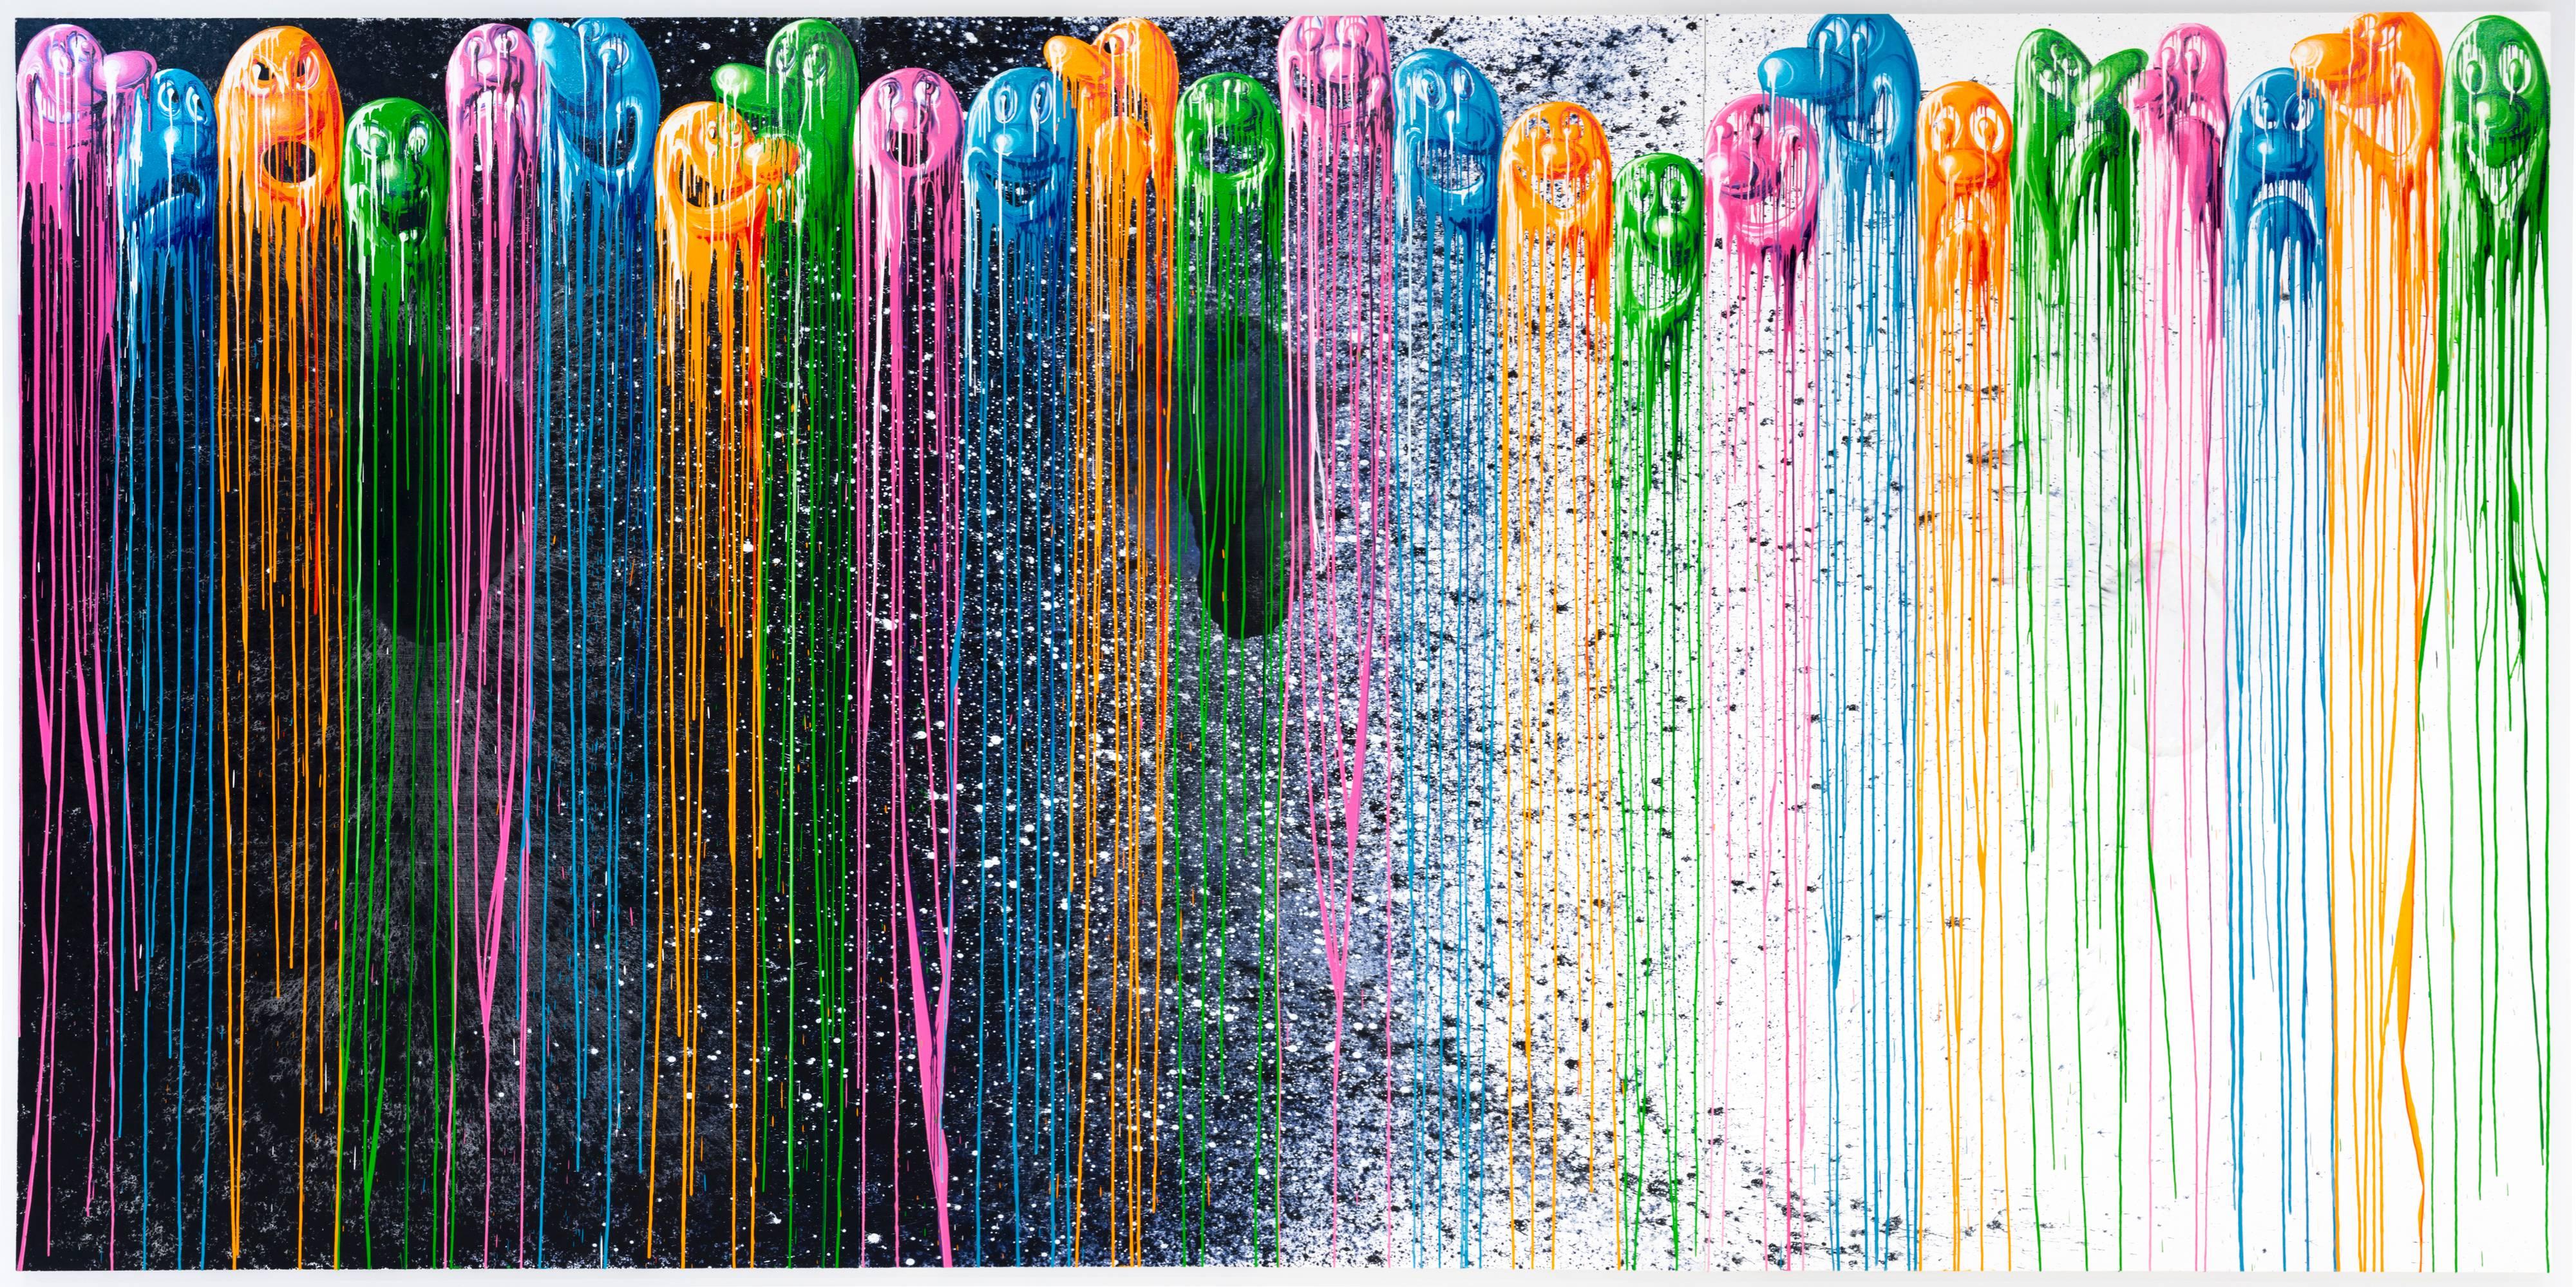 Were Melting Together Night and Day - Painting by Kenny Scharf